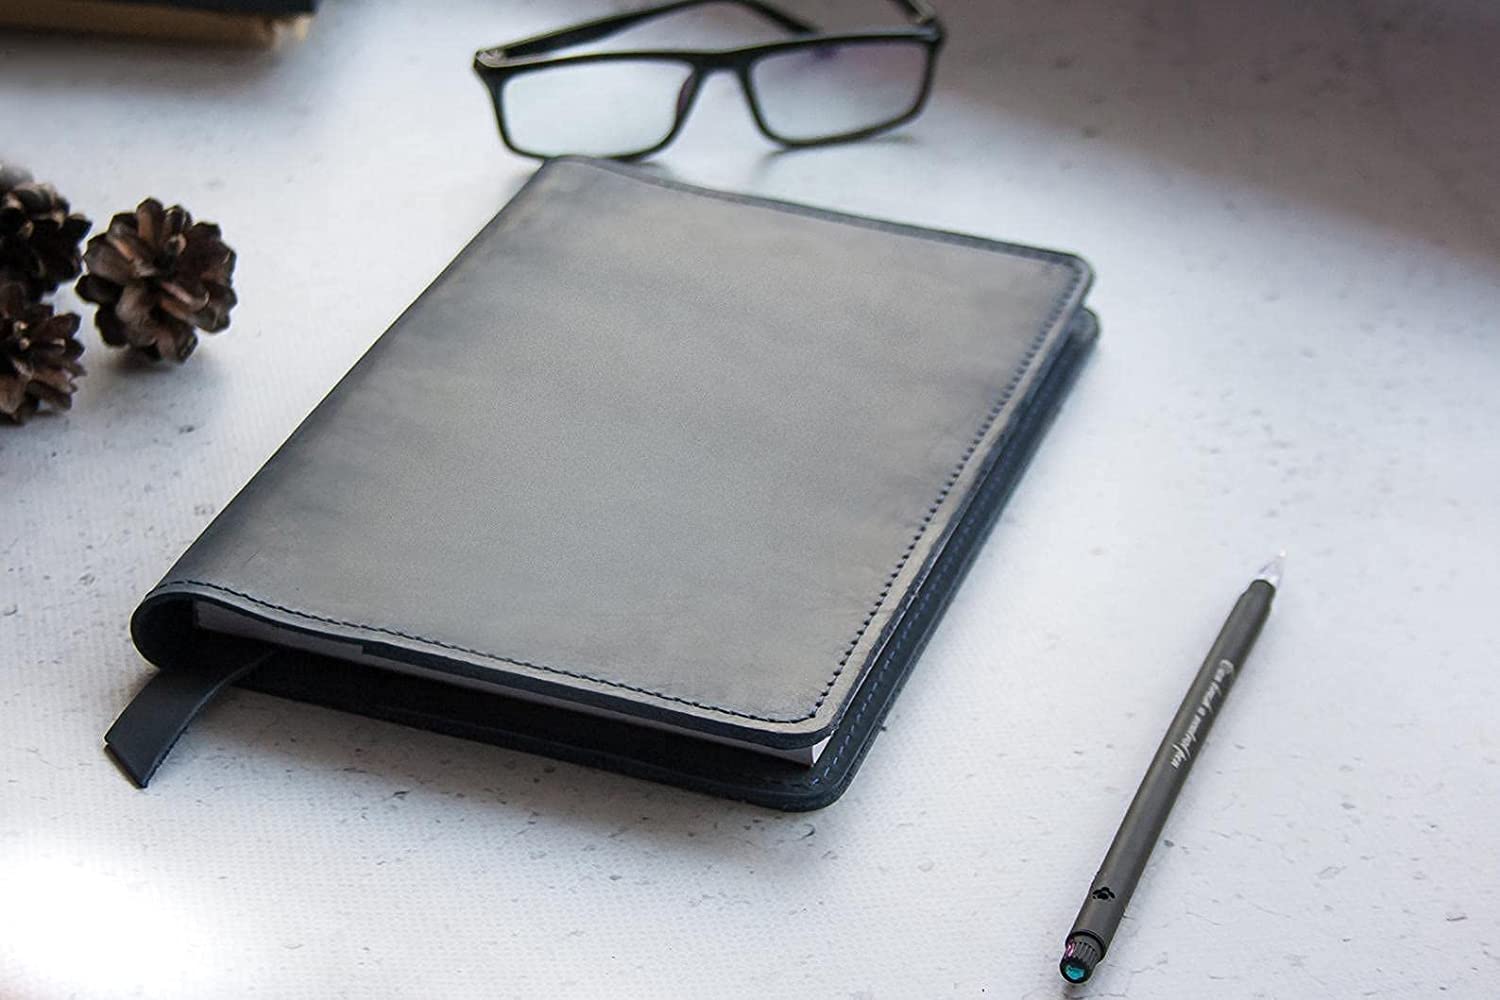 Handmade Leather Journal Refillable Notebook